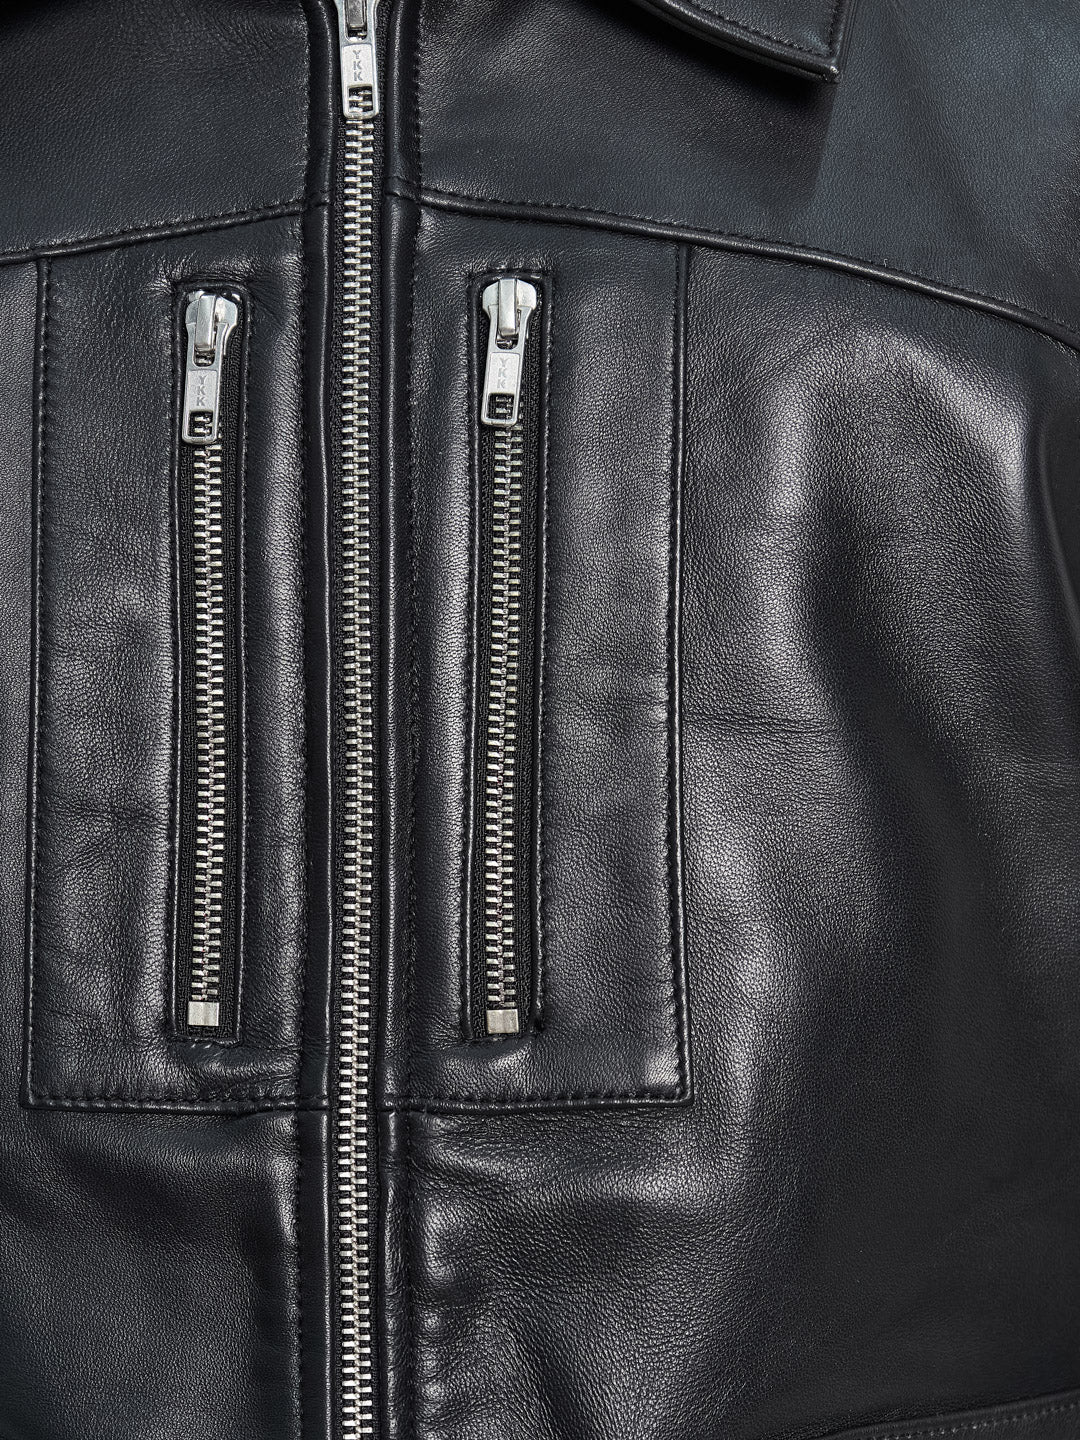 Relaxed Fit Thick Black Leather Jacket